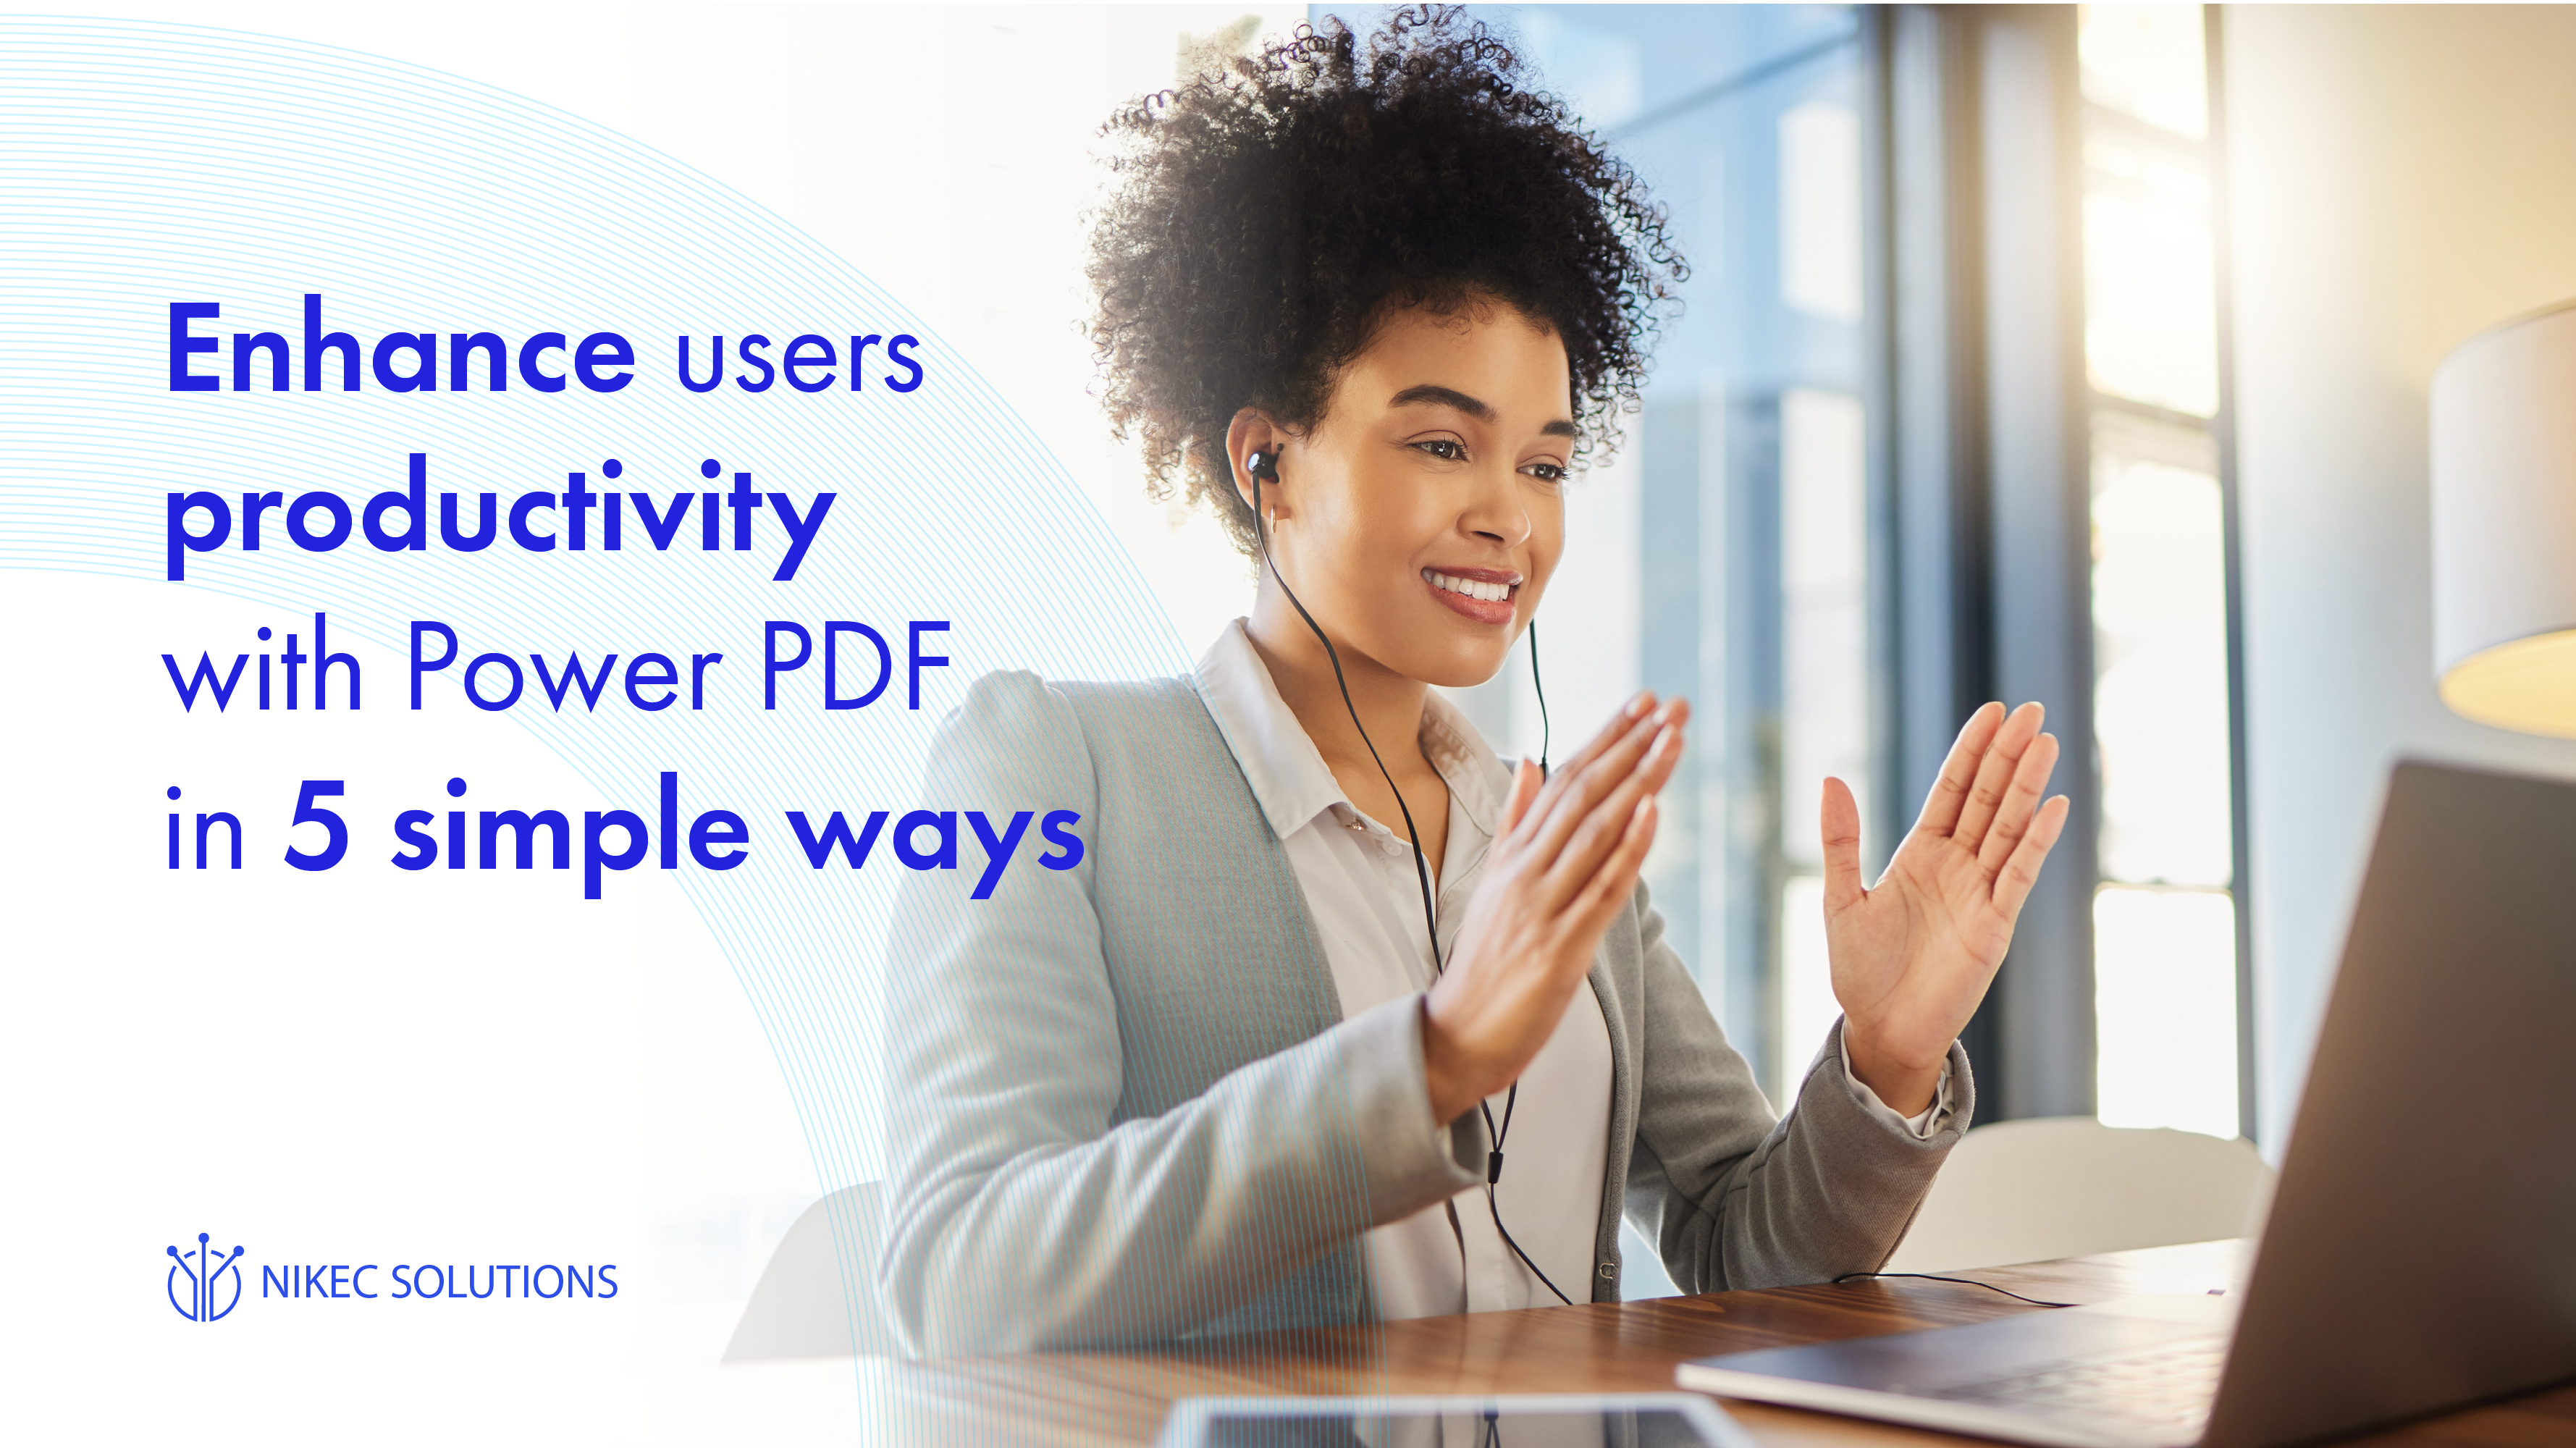 Enhance users productivity with Power PDF in 5 simple ways to help firms to work smarter, more efficiently and get close to clients.